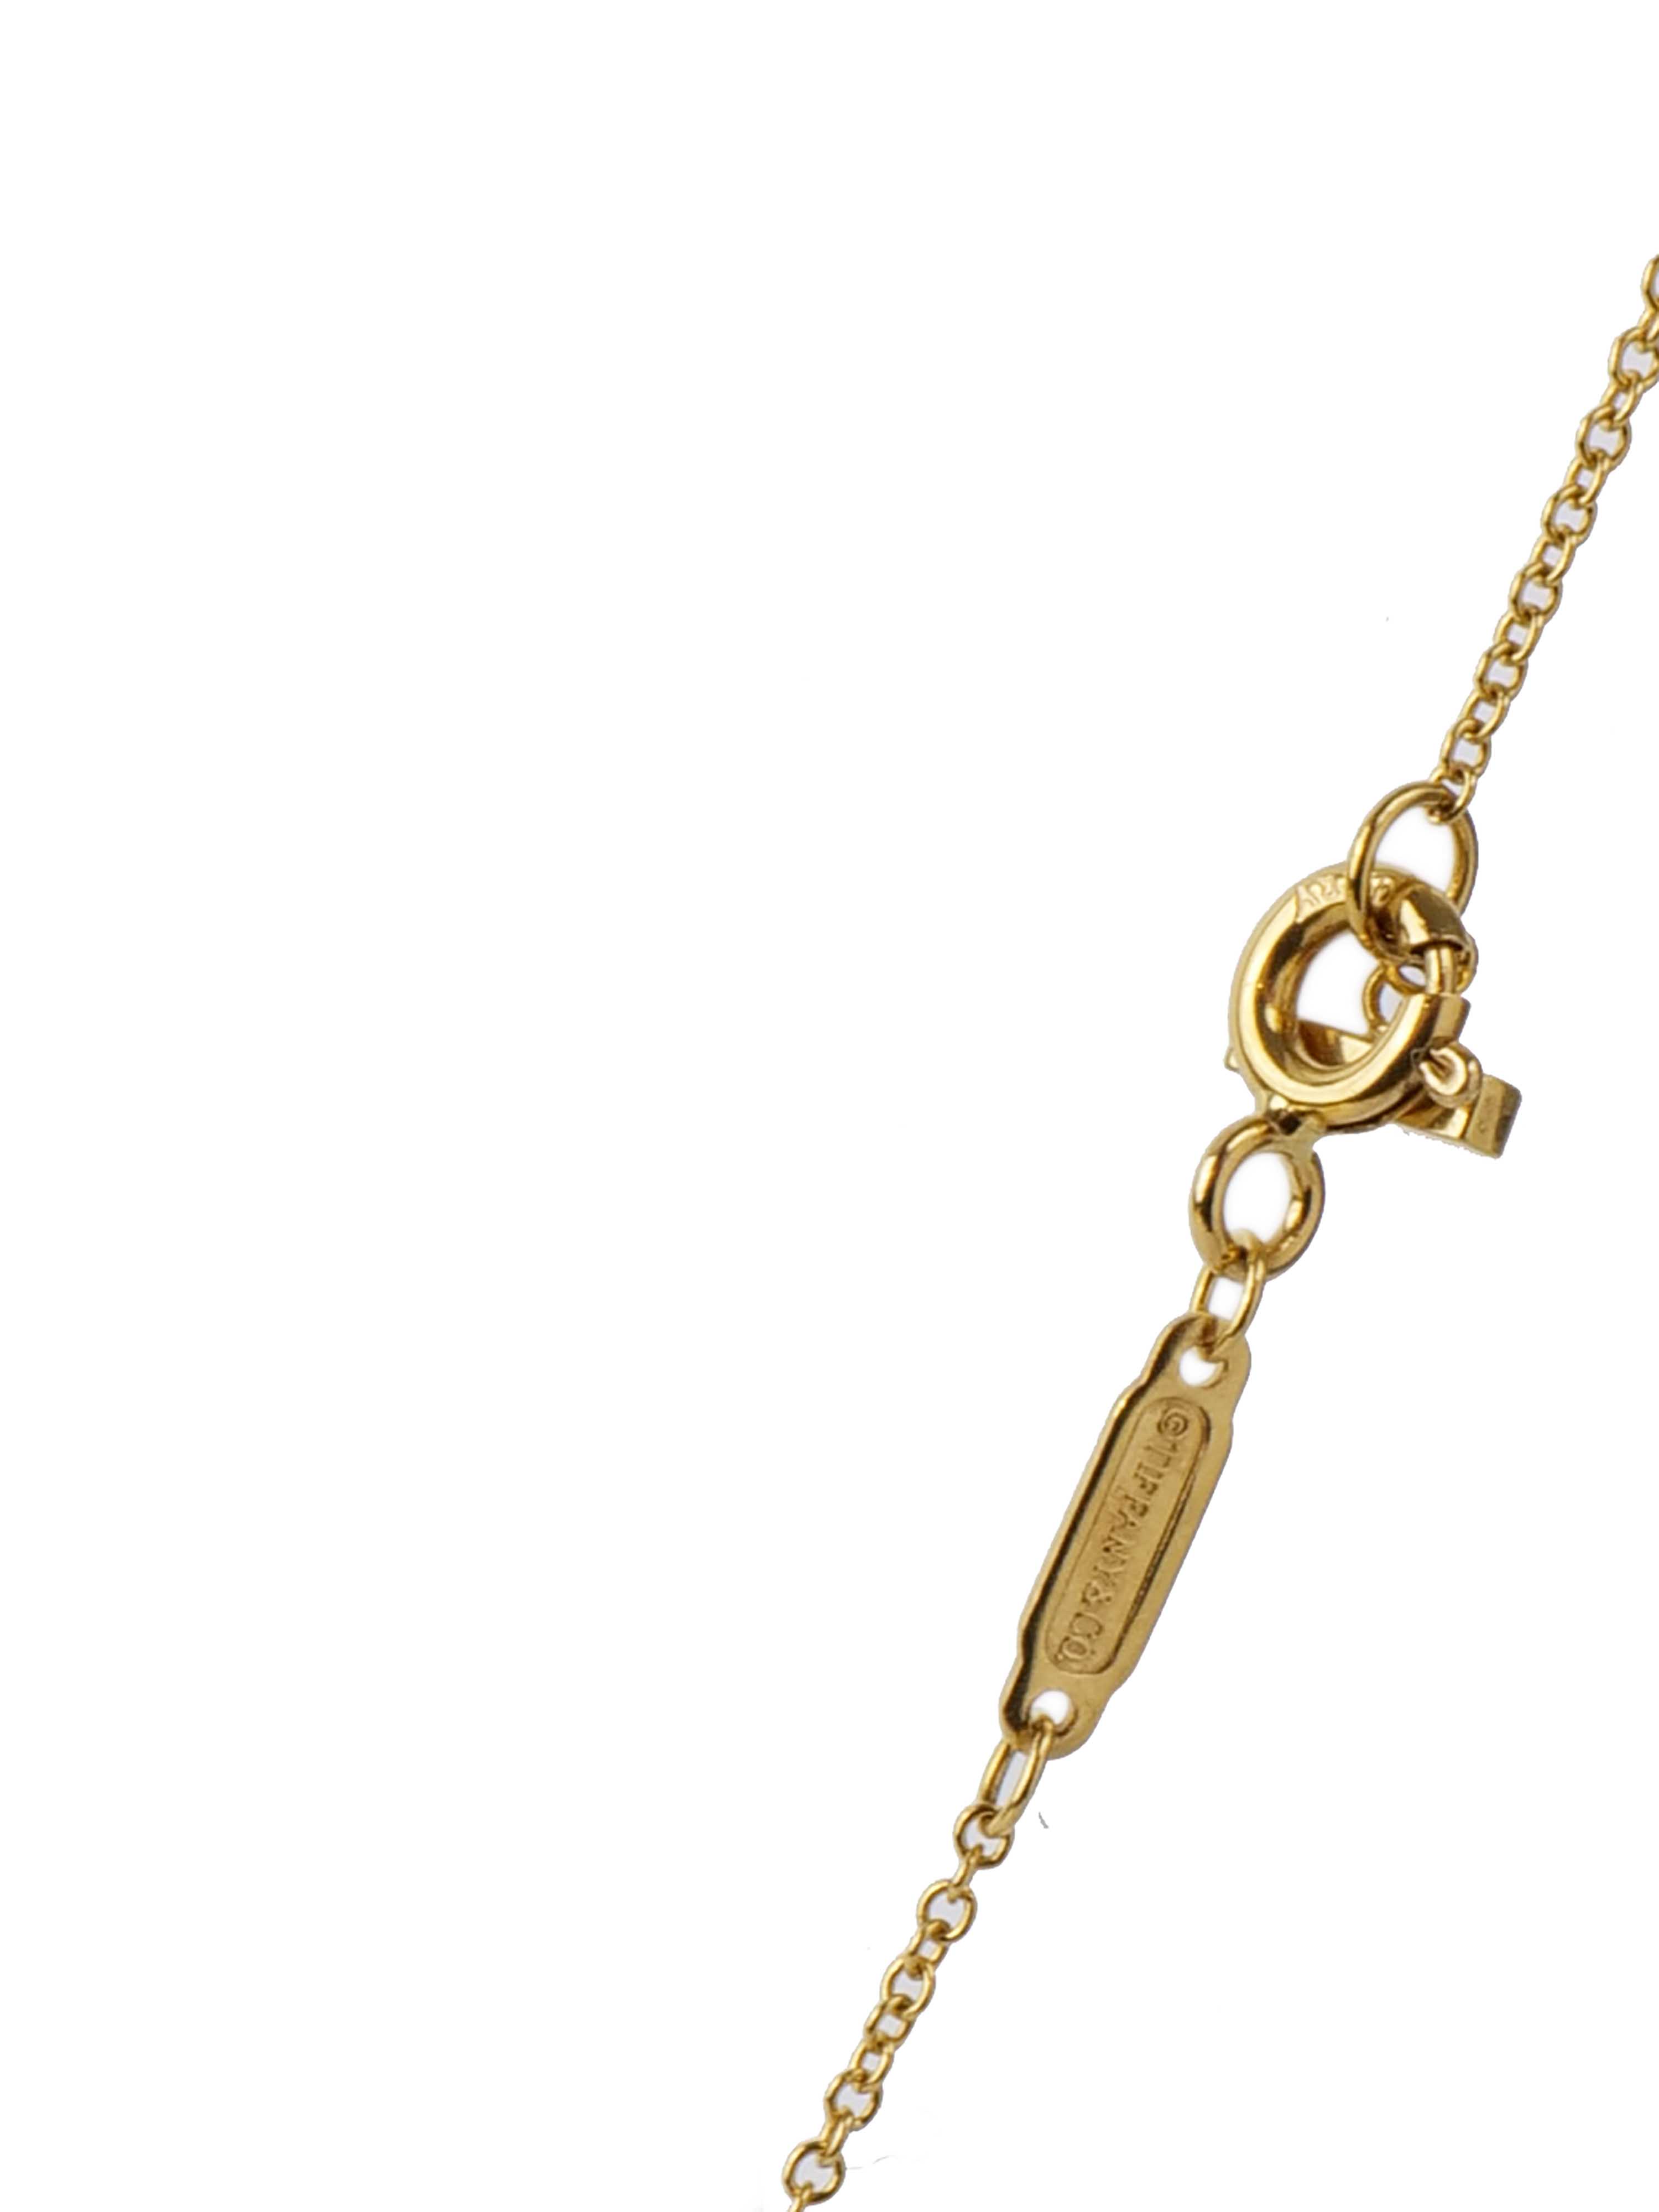 Tiffany & Co 18k Yellow Gold Smile Necklace.